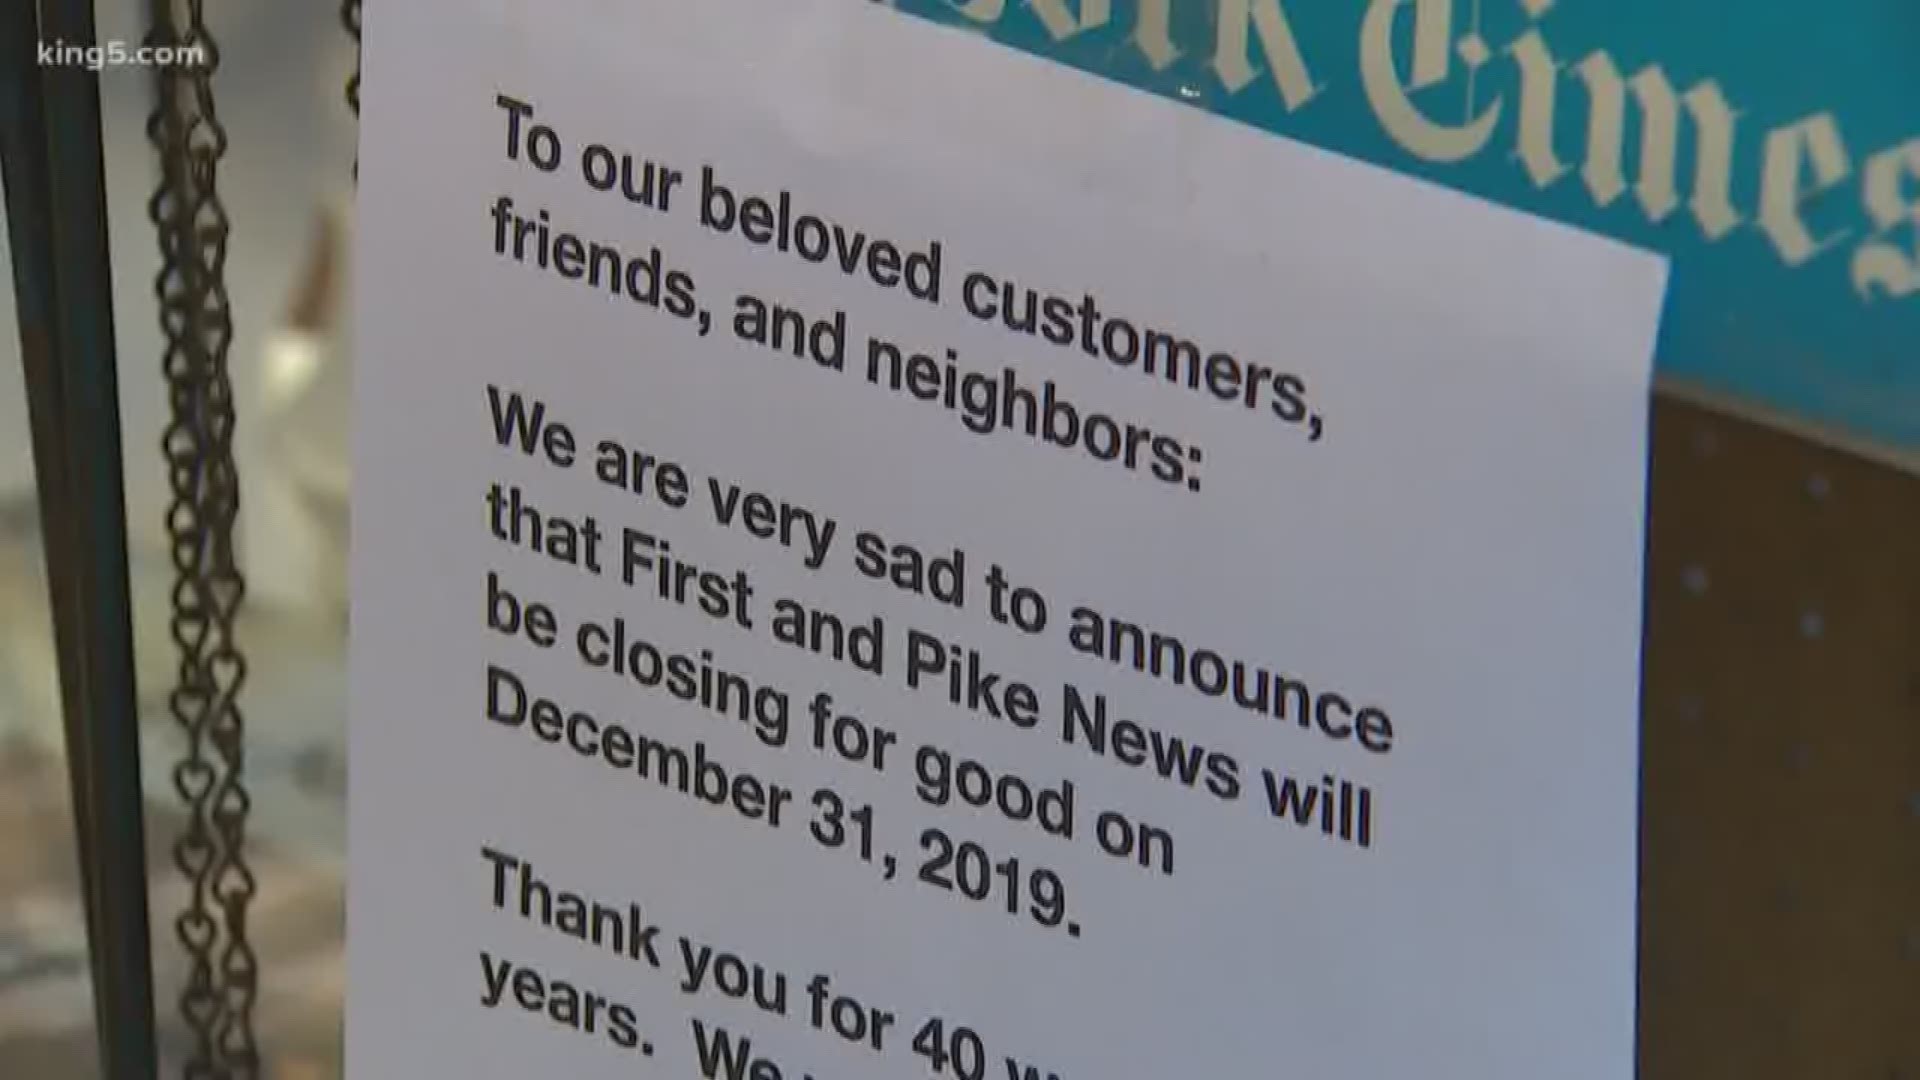 First & Pike News has been open for business for 40 years at the Market's entryway.